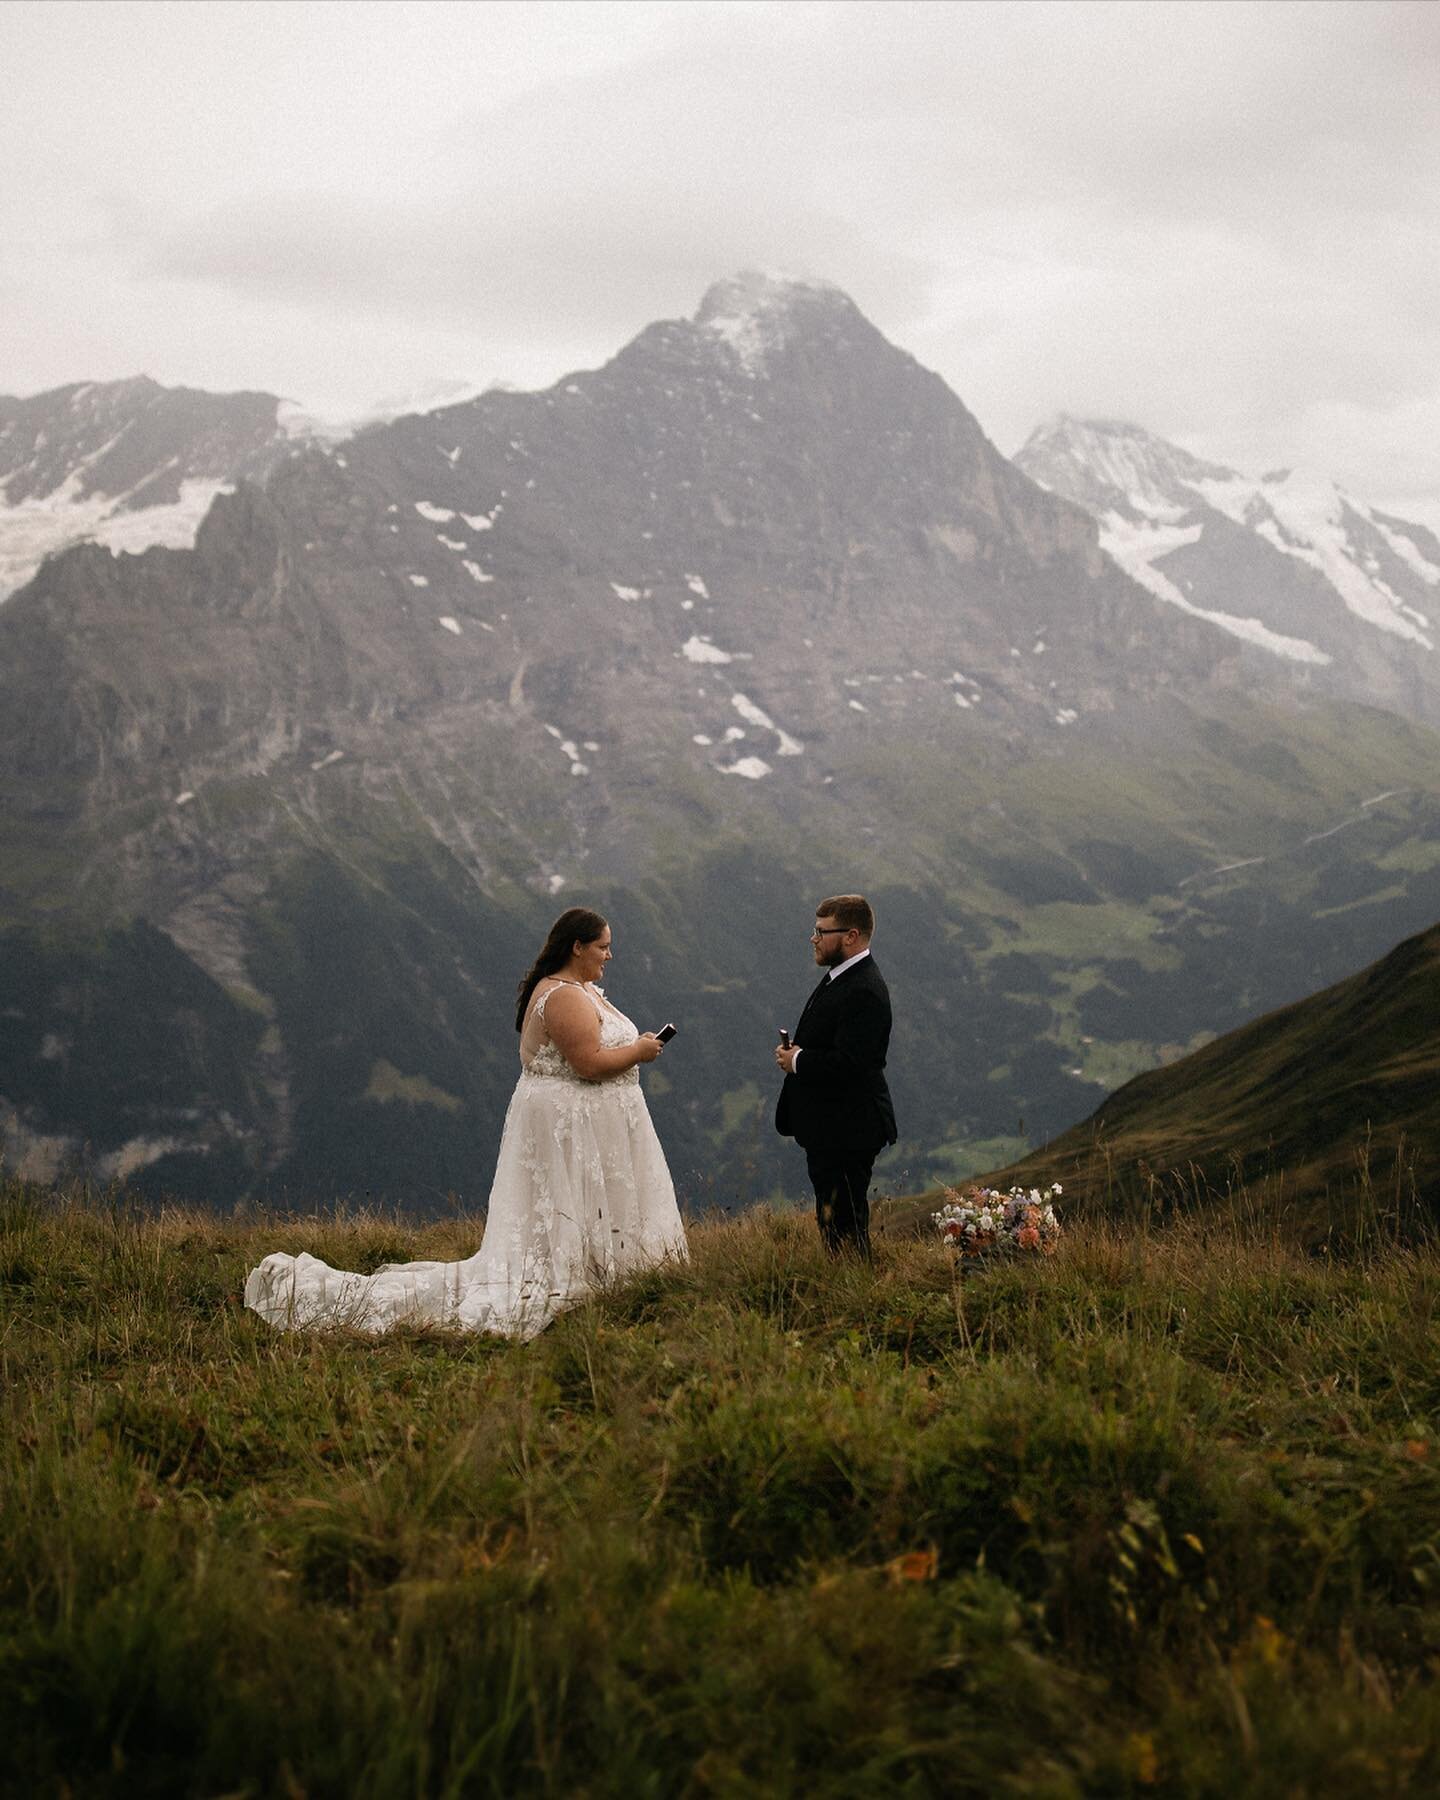 What an amazing time with the sweetest couple in Switzerland! A&amp;S traveled to celebrate their wedding day in the Swiss Alps and I don&rsquo;t think they could&rsquo;ve chosen a better place for their day. Everything about their time there felt so